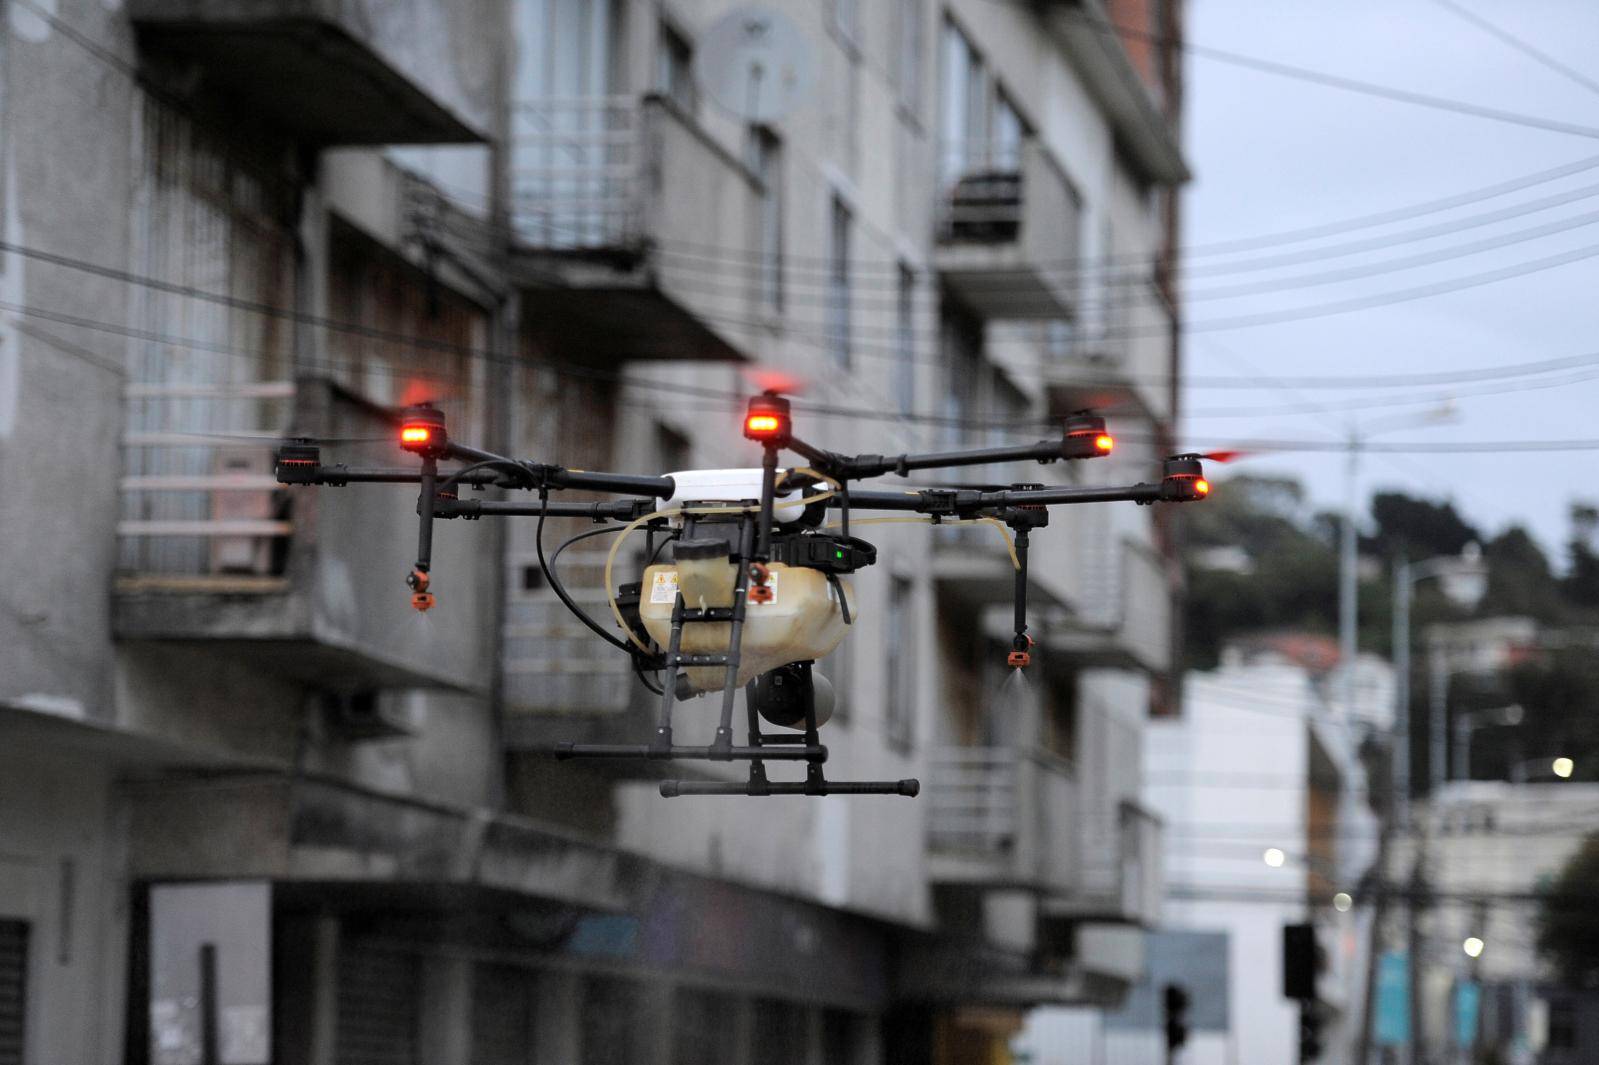 A drone is used to release disinfectant on streets during the coronavirus disease (COVID-19) outbreak in Talcahuano